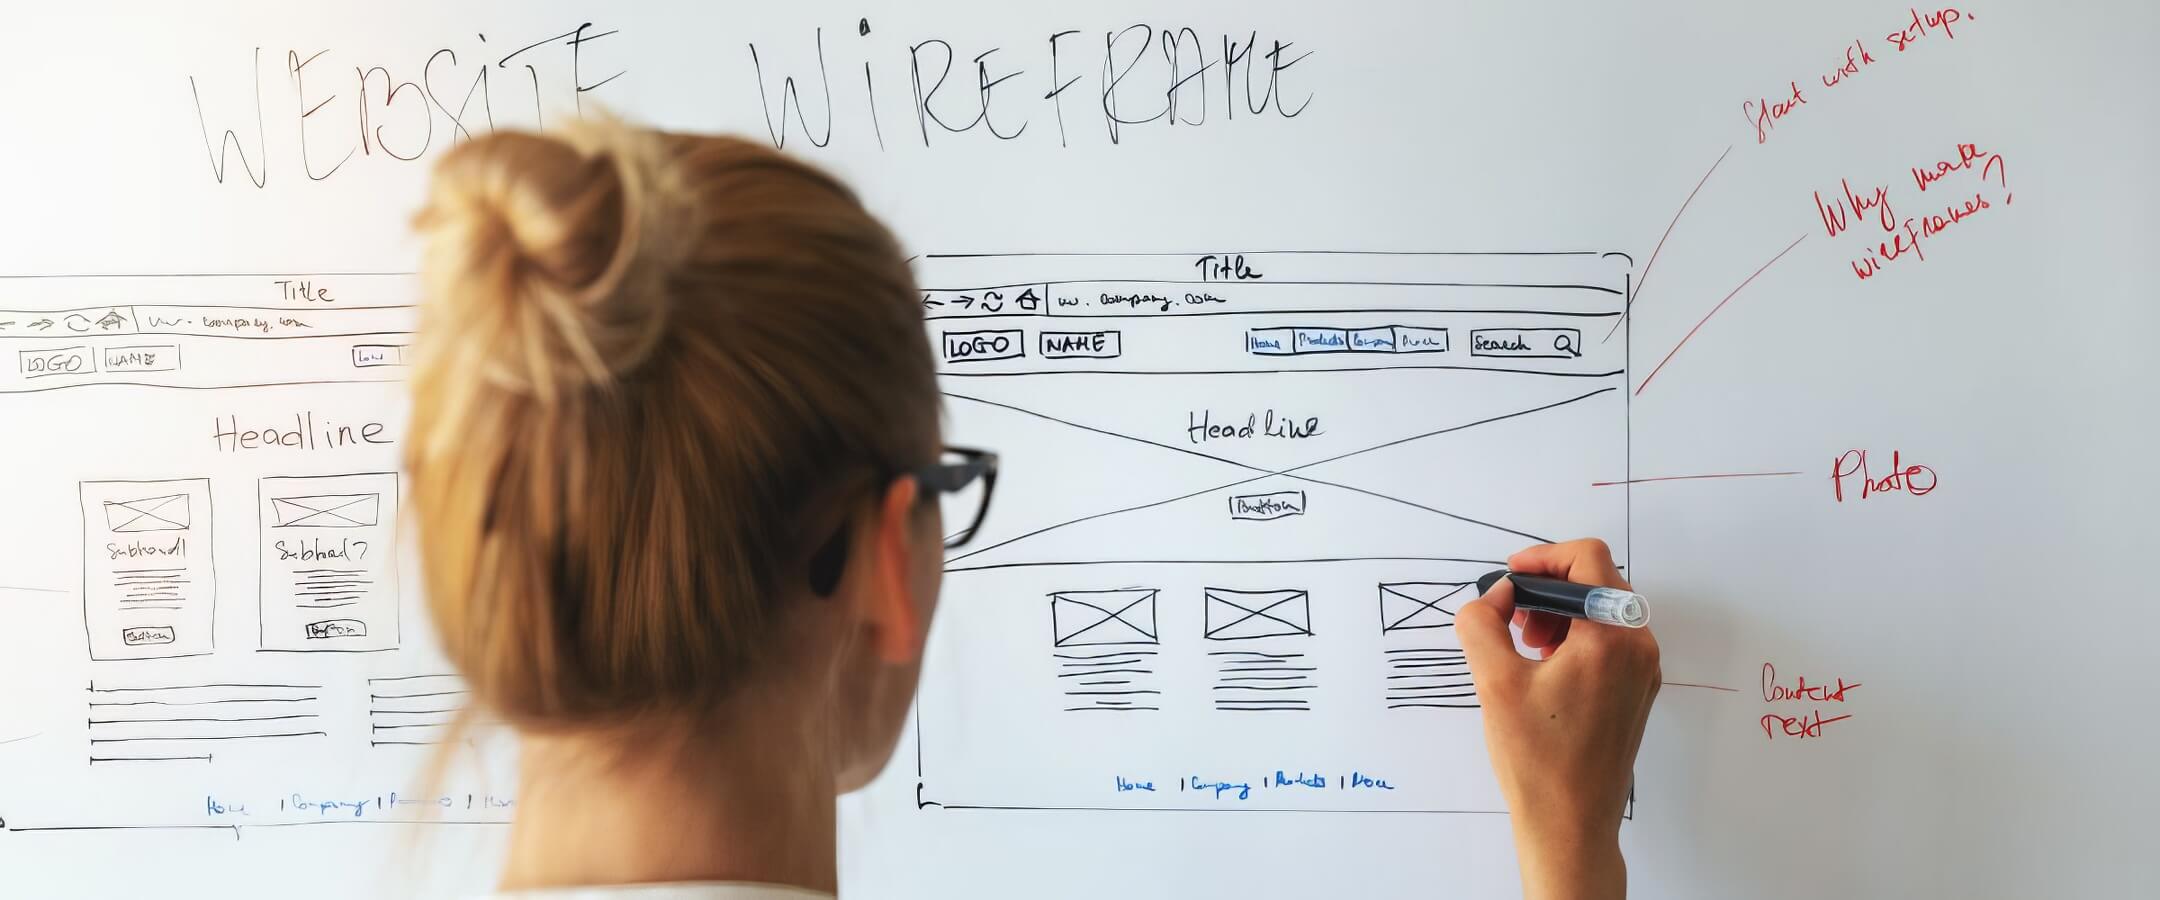 3 reasons to do wireframes for better website designs 20230907 204009